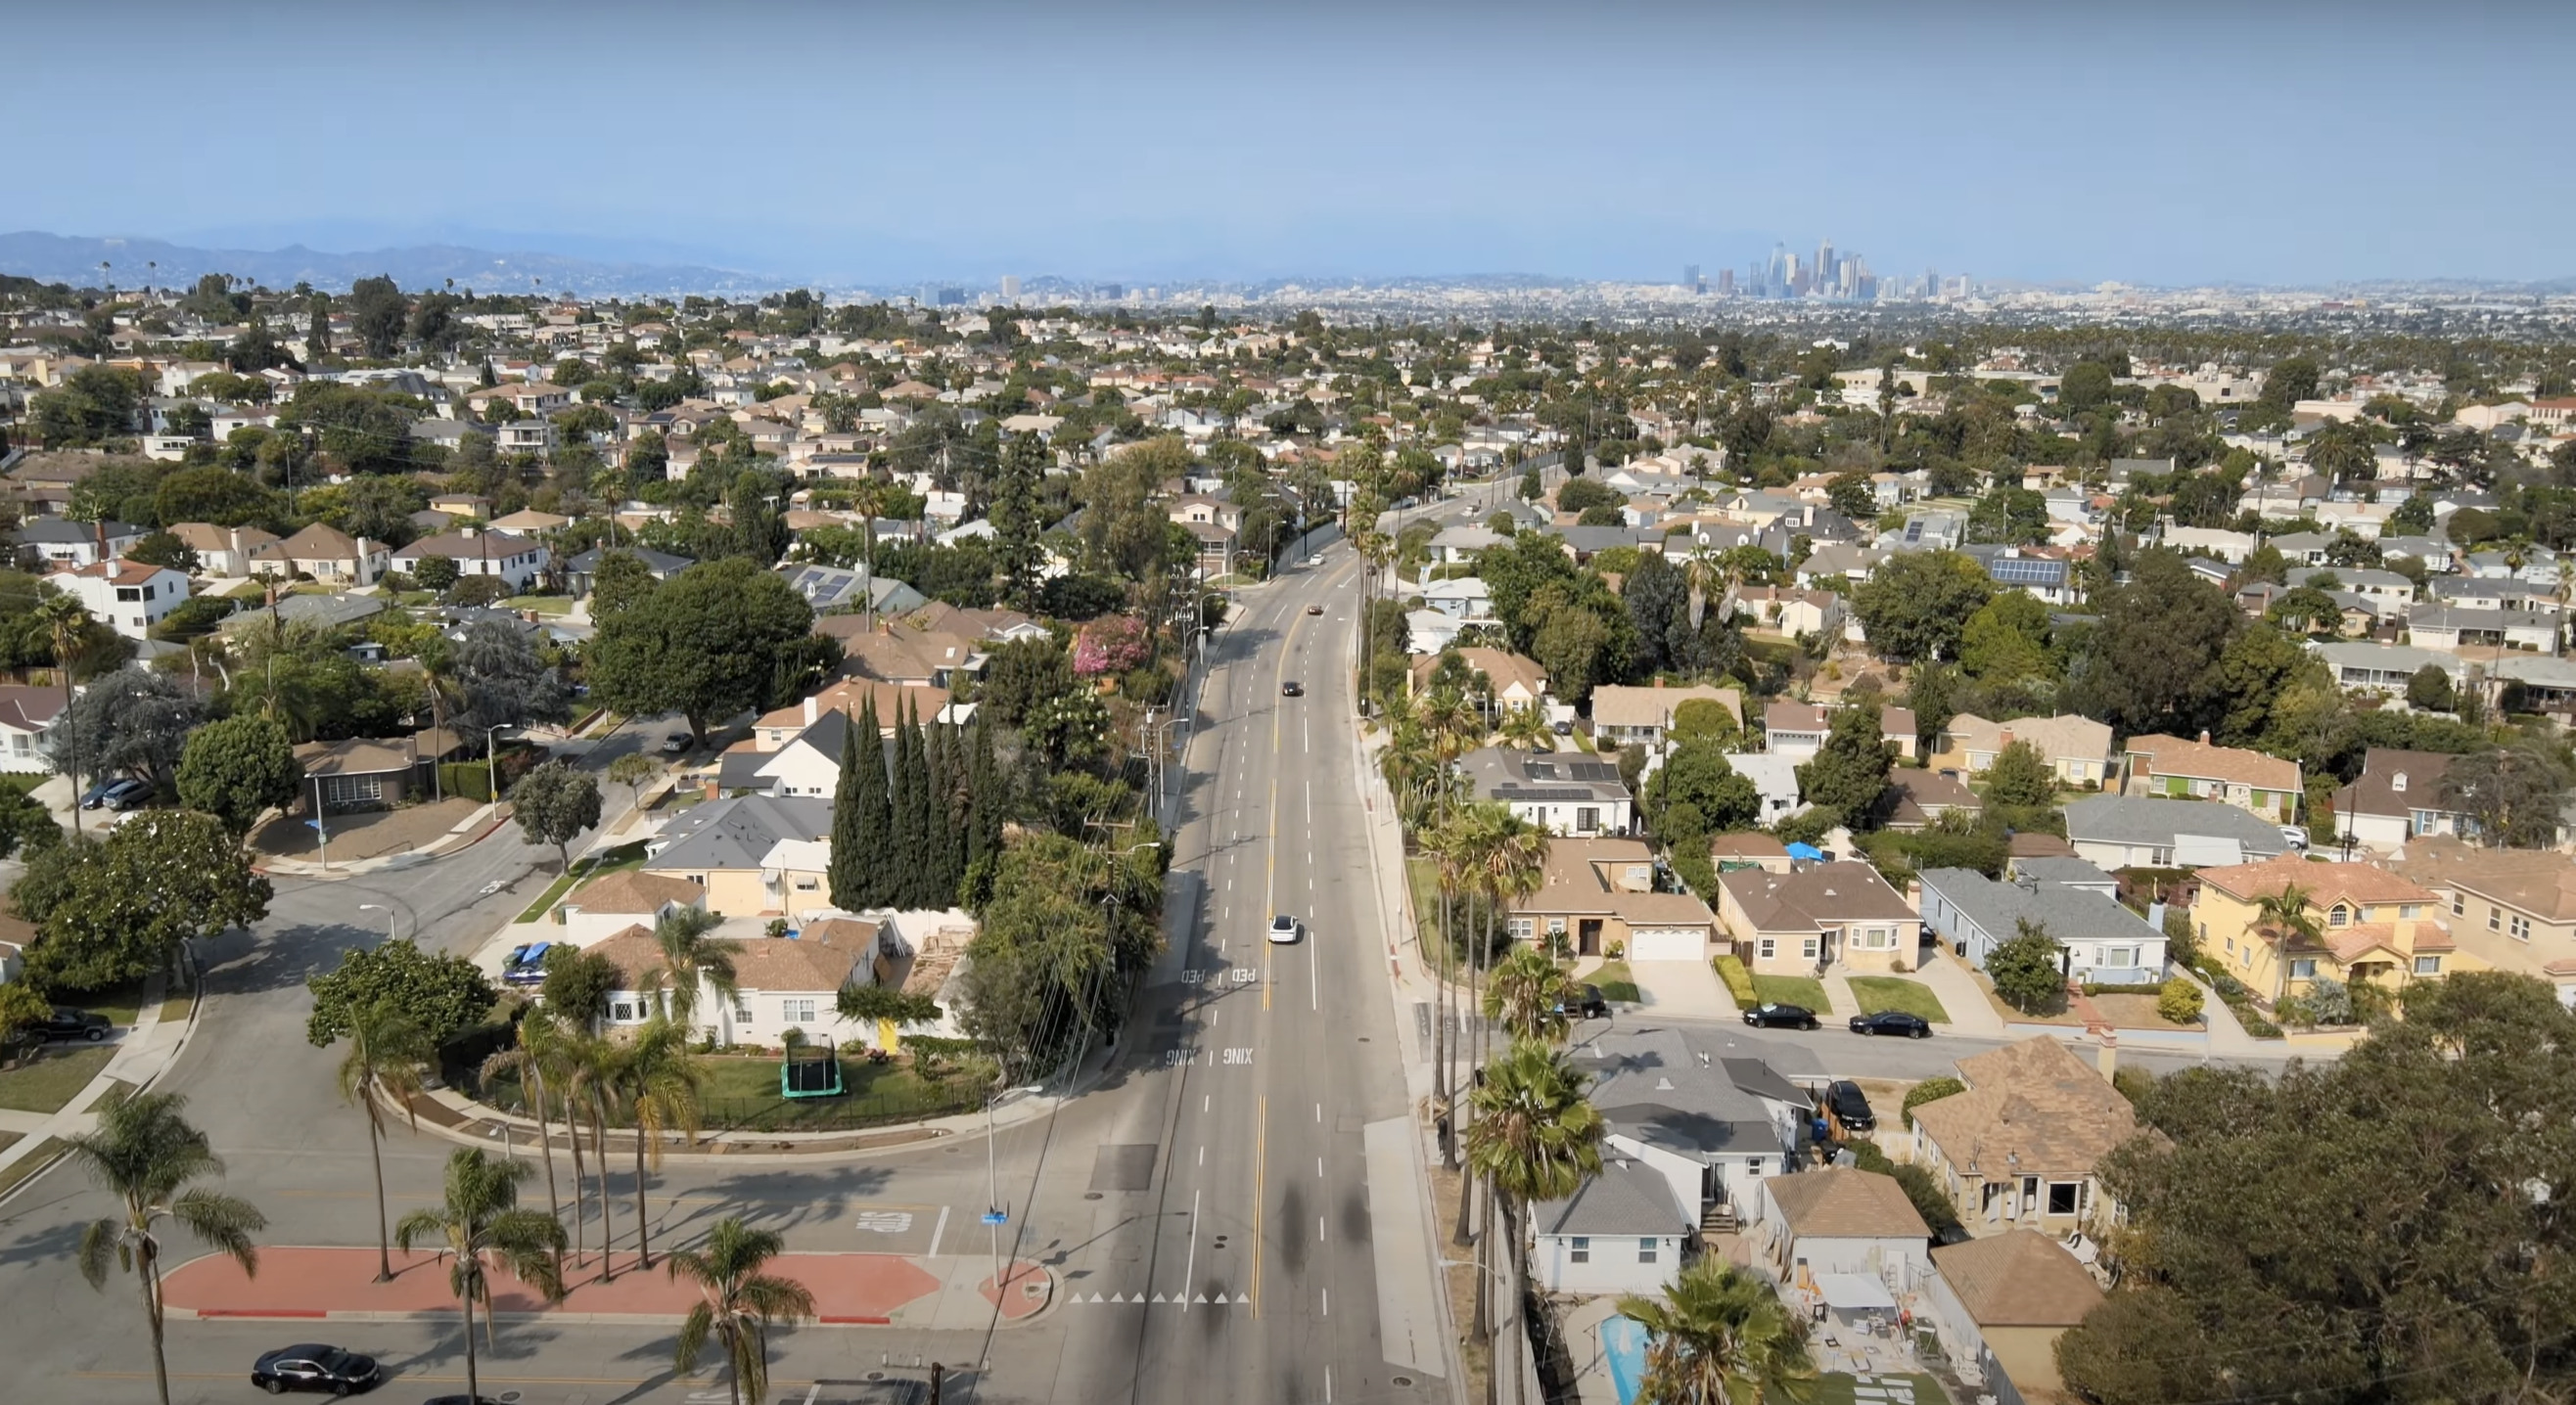 Windsor Hills / Viewpark area of south west Los Angeles